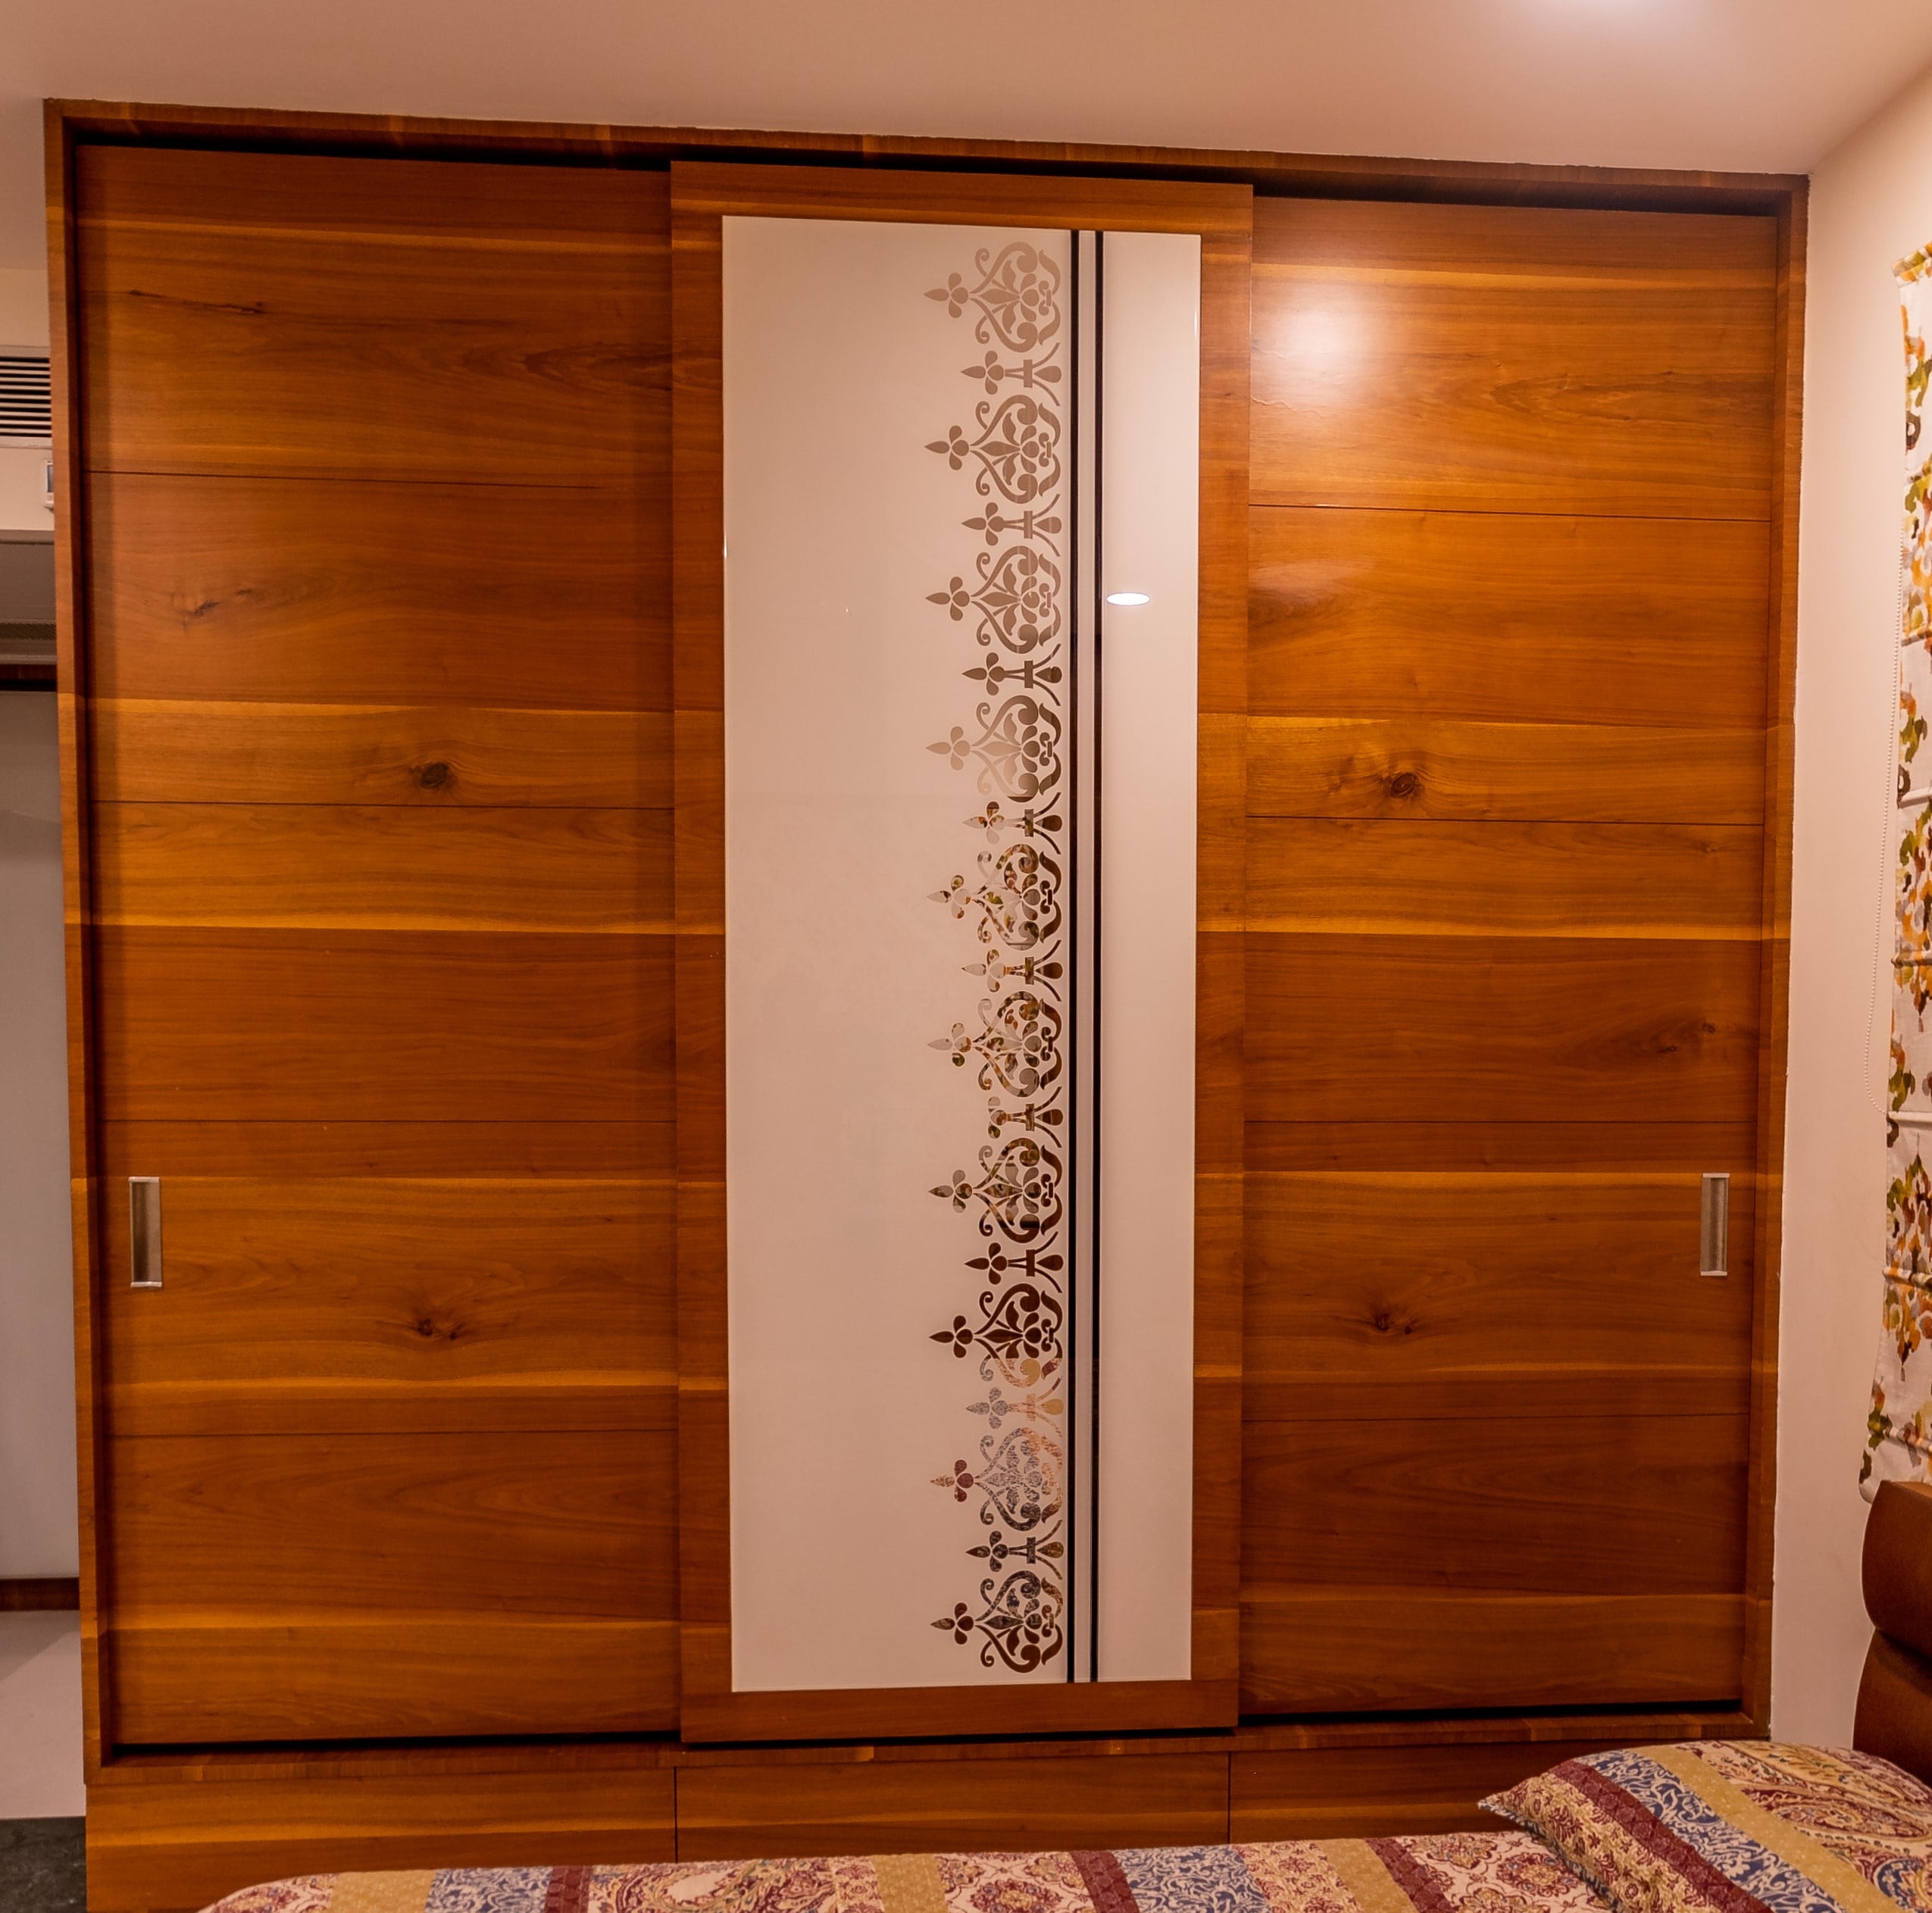 Wardrobe Designs For Bedroom Indian Laminate Sheets Archives